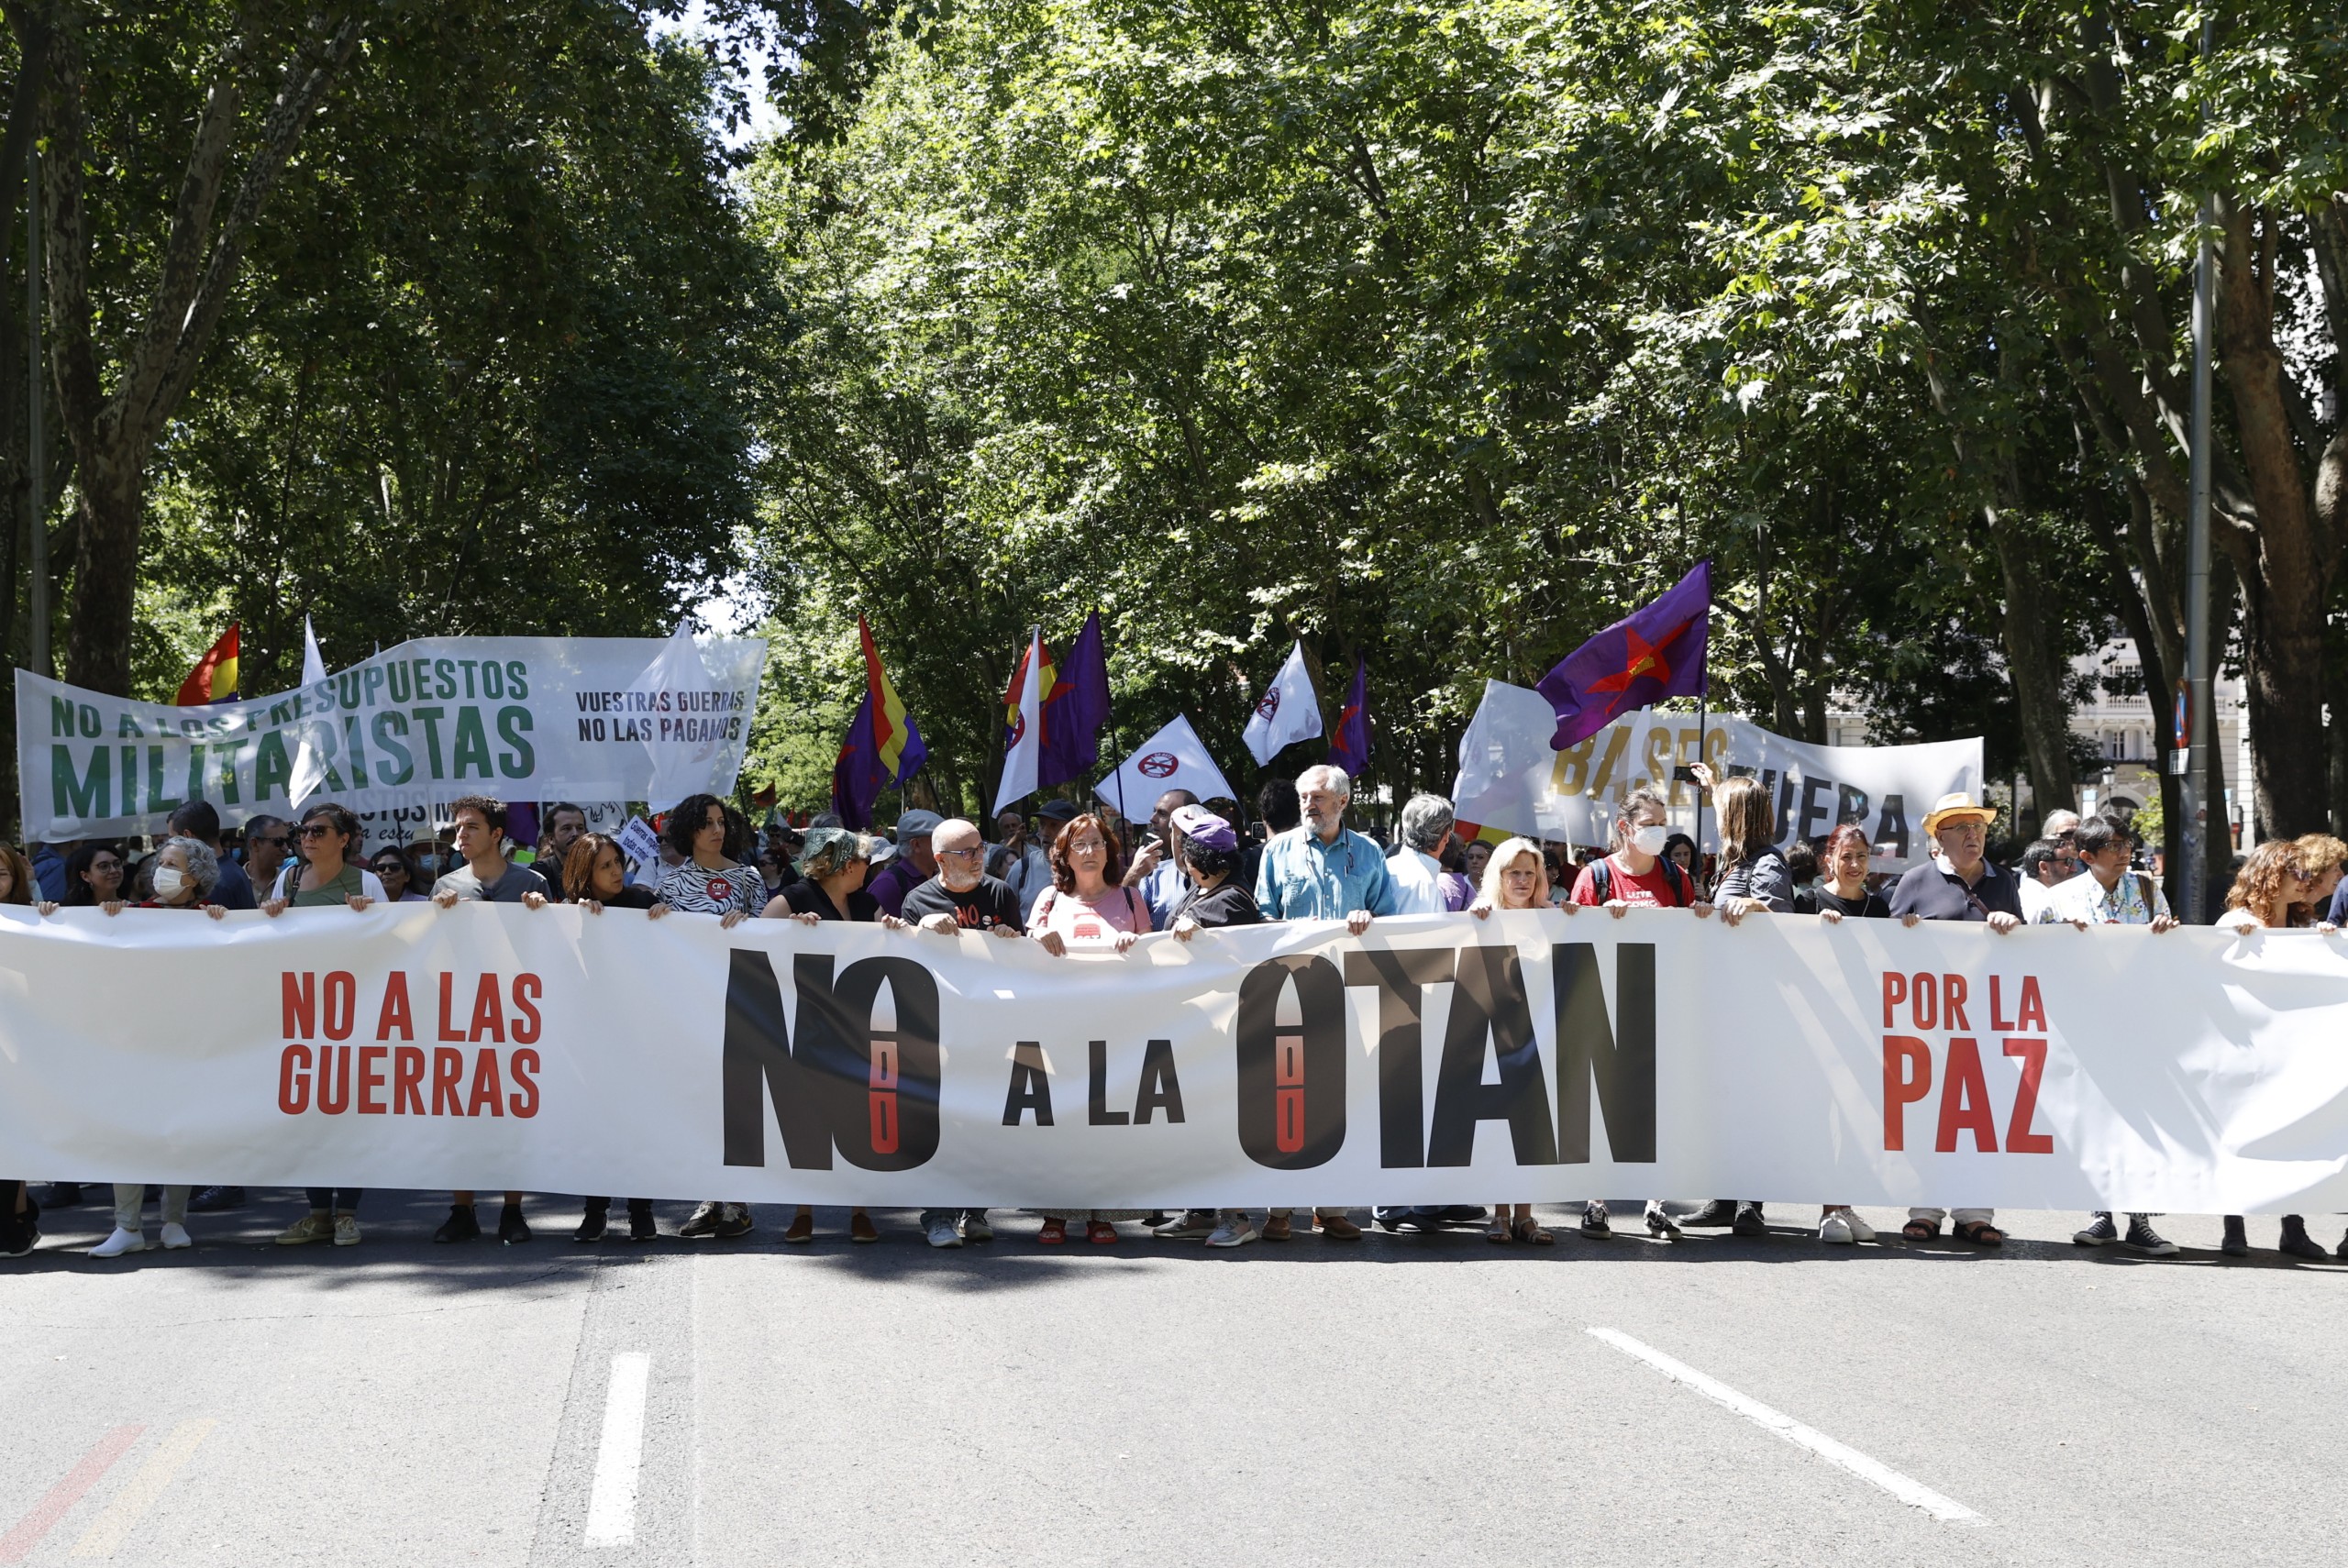 epa10034868 People attend a protest against NATO ahead of a NATO summit to be held in Madrid, Spain, 26 June 2022. A NATO Summit will be held in Madrid from 29 to 30 June.  EPA/J.J. Guillen